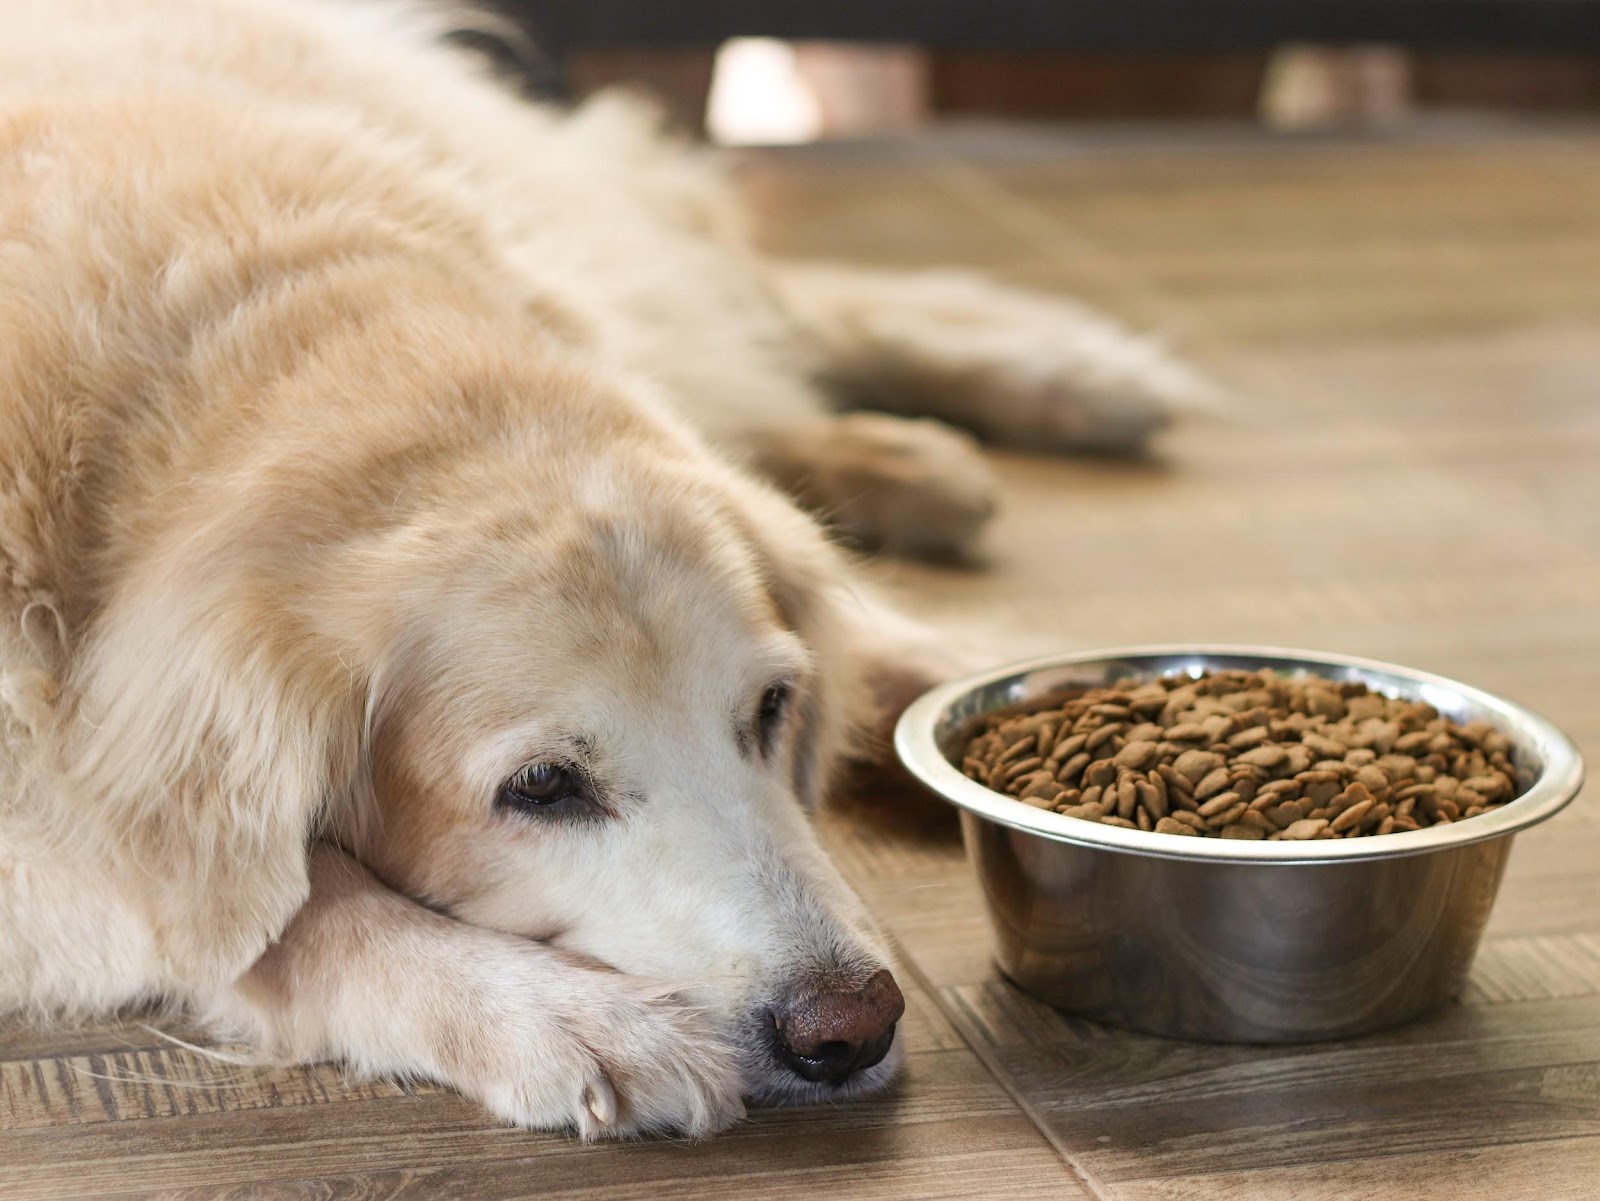 Why can't dogs eat dog food?